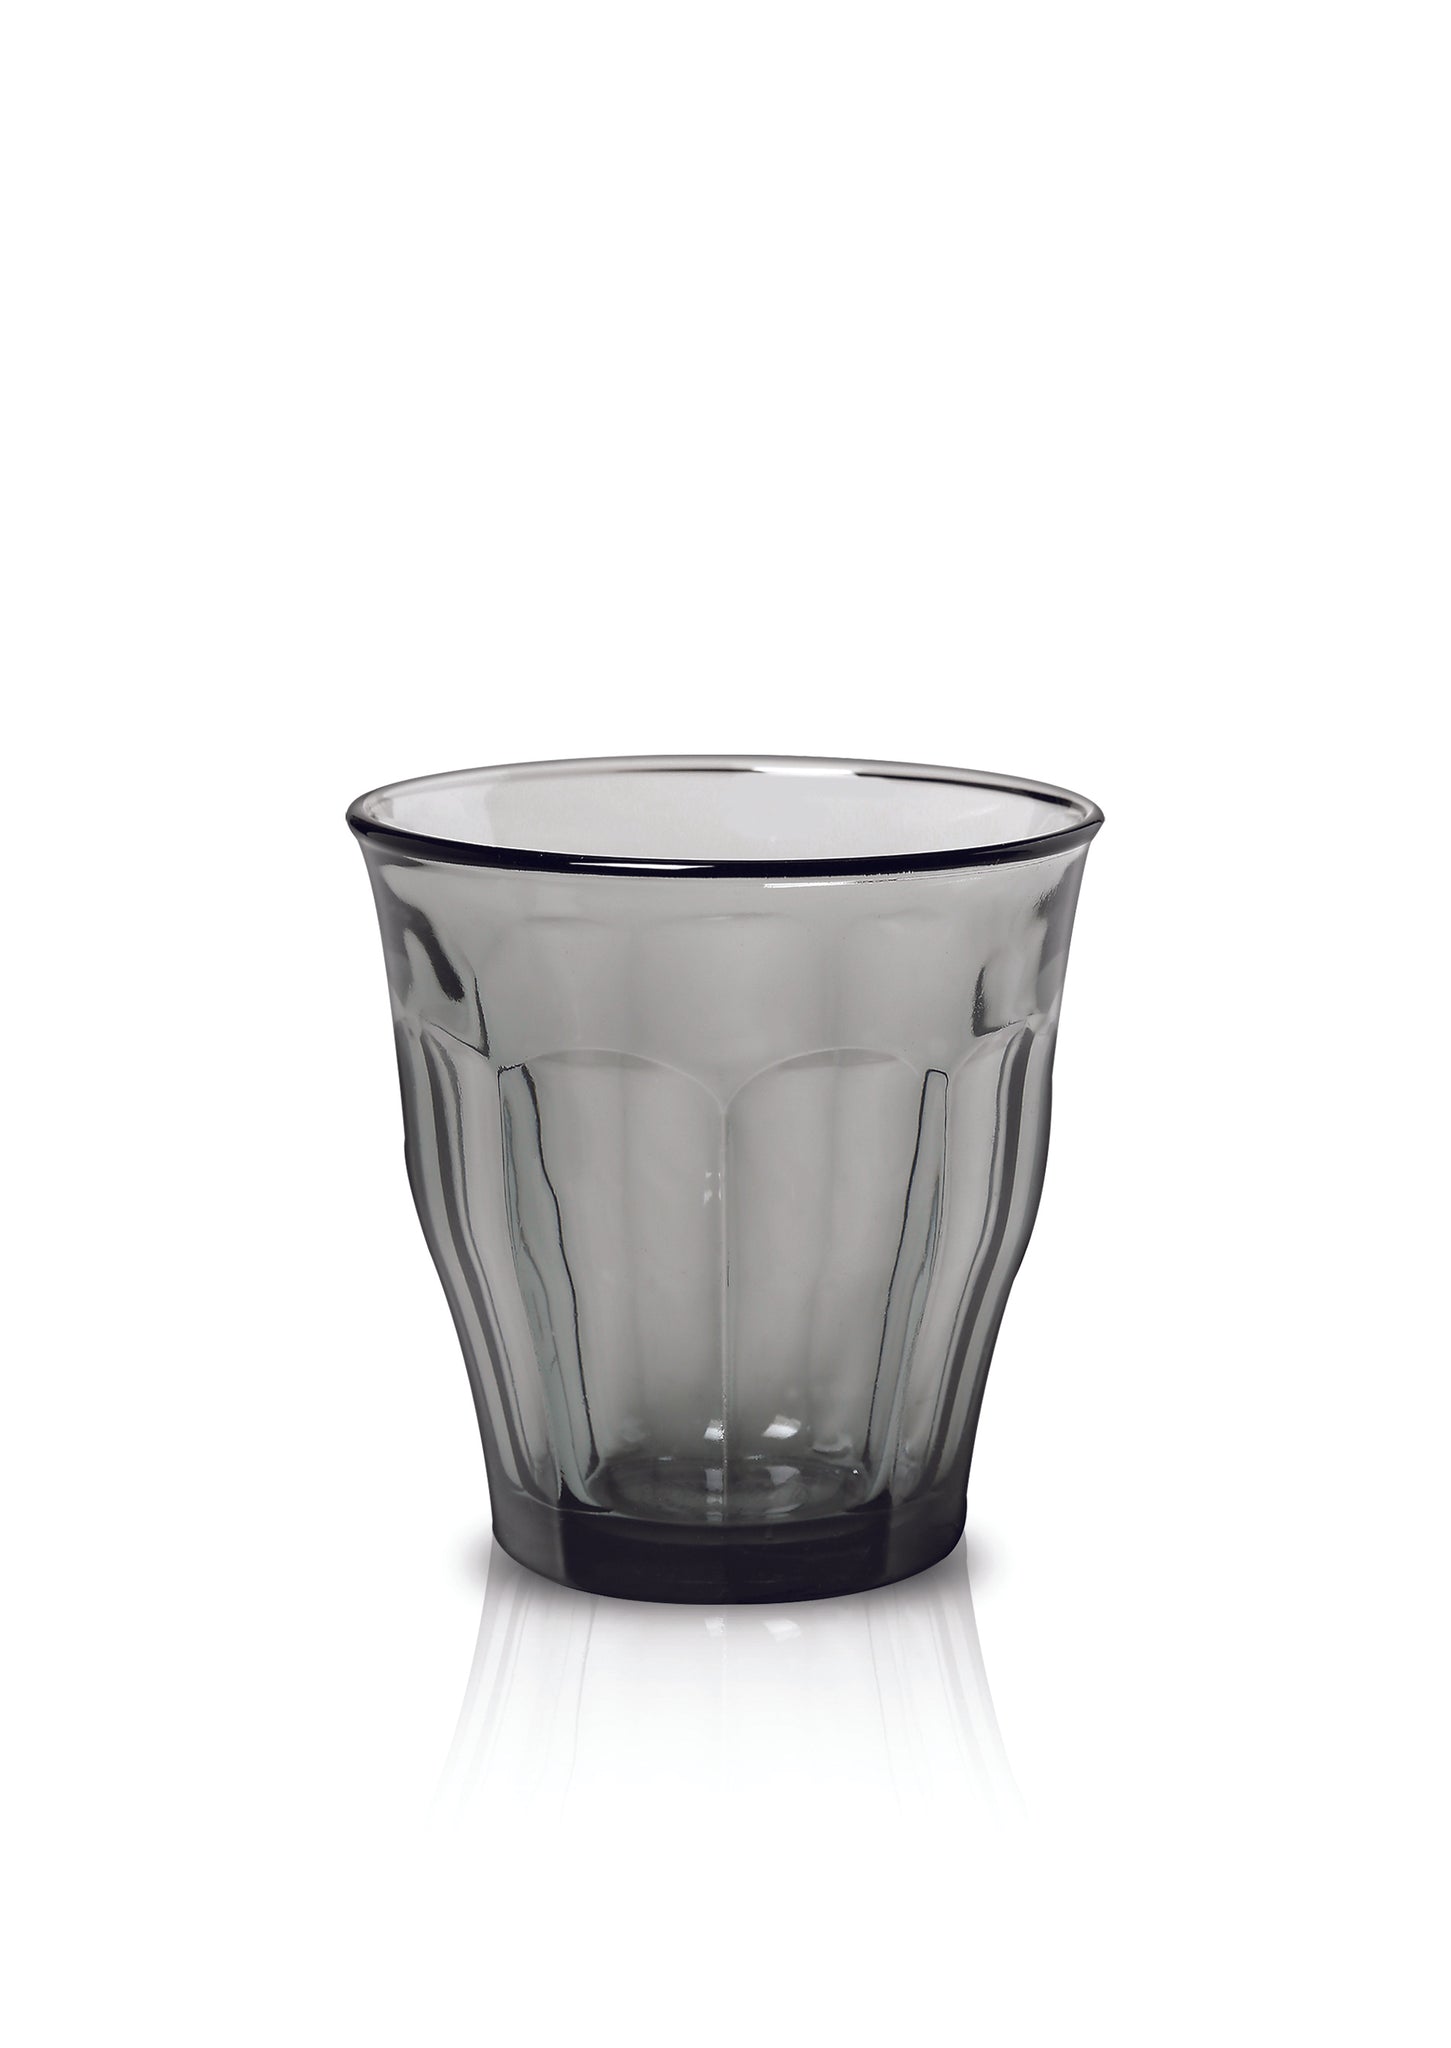 Duralex Picardie 12 5/8 Ounce Clear Stackable Drinking Glasses